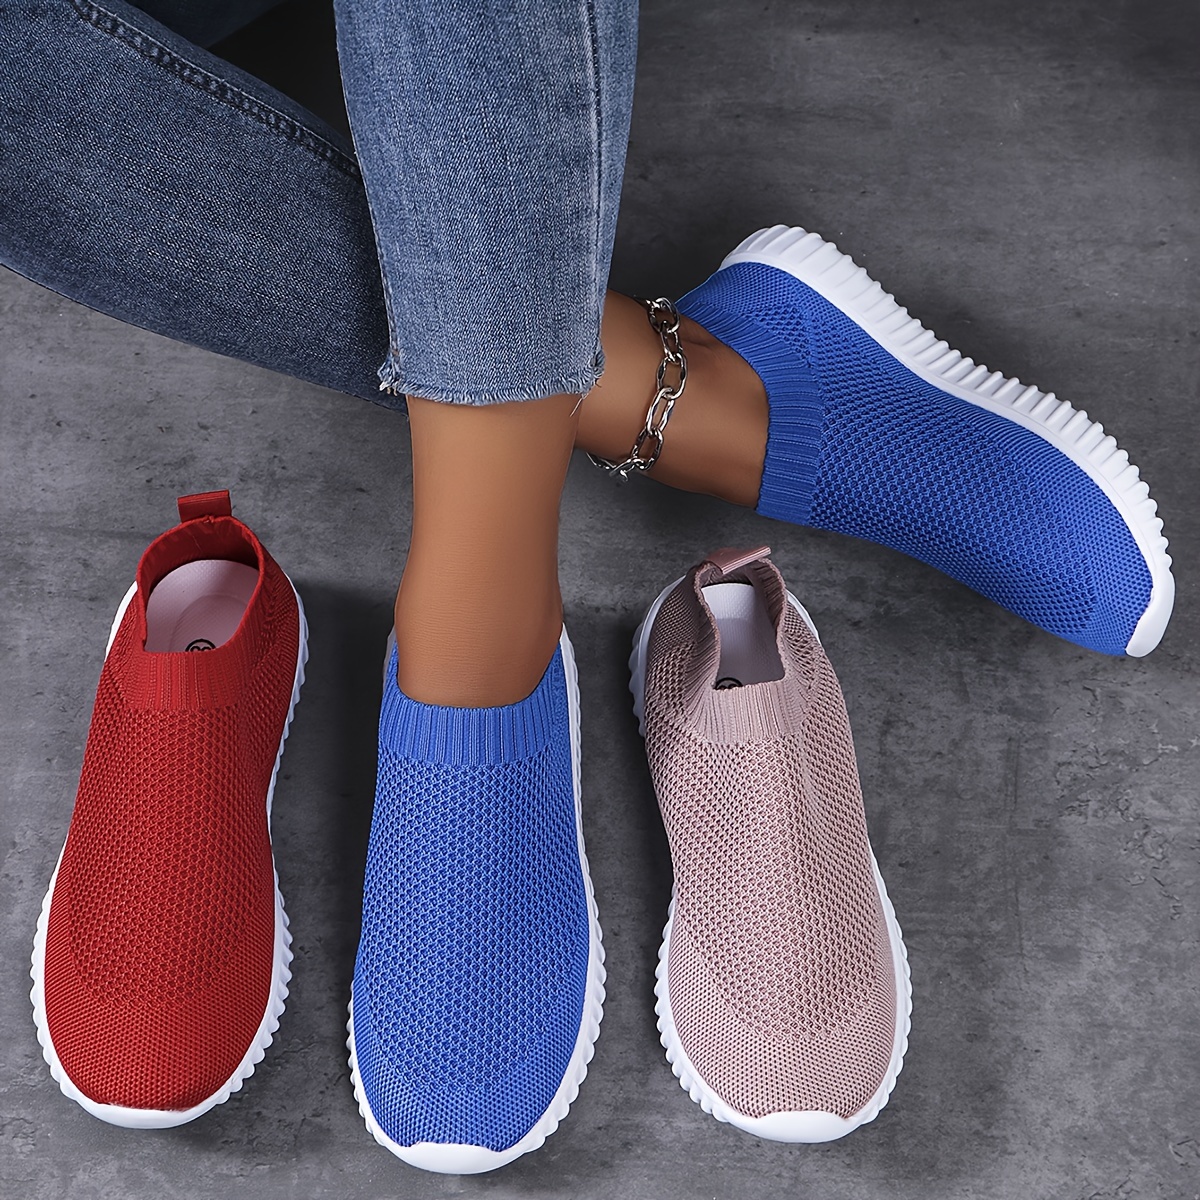 

Women's Solid Color Sock Sneakers, Breathable Knitted Slip On Walking Trainers, Casual Lightweight Sports Shoes